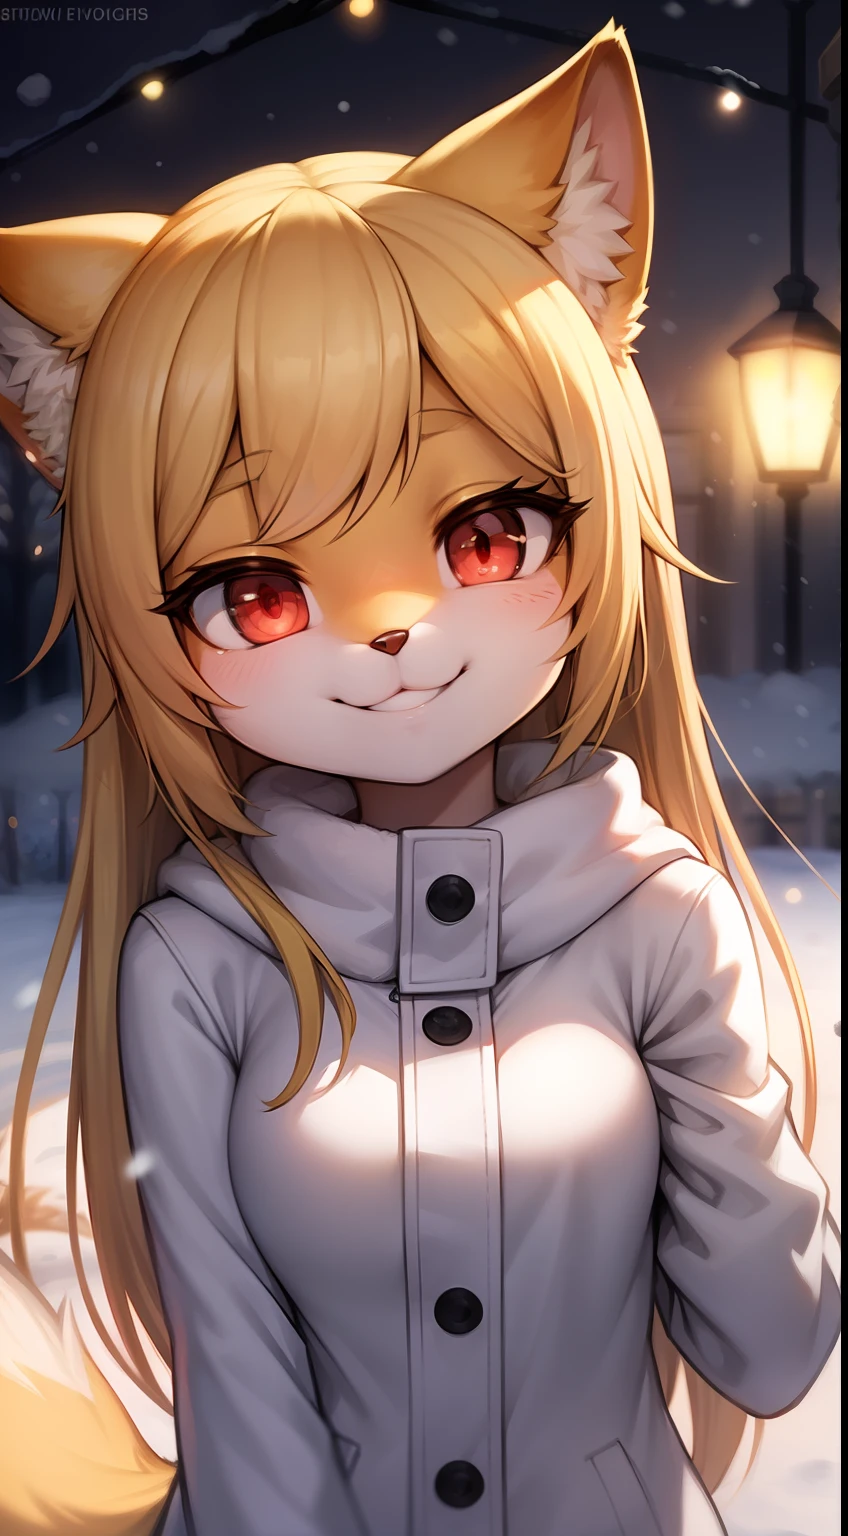 Fox girl, furry, furry, golden fur, golden face fur, long blonde hair, eyes with light, red eyes, super cute face, brown elements on fur, white coat, beautiful lights and shadows, ambient light, super fine fur, volumetric light, night, natural lighting, smile, fluffy tail, color contact lenses, Christmas background, snow, bright pupils, smiley